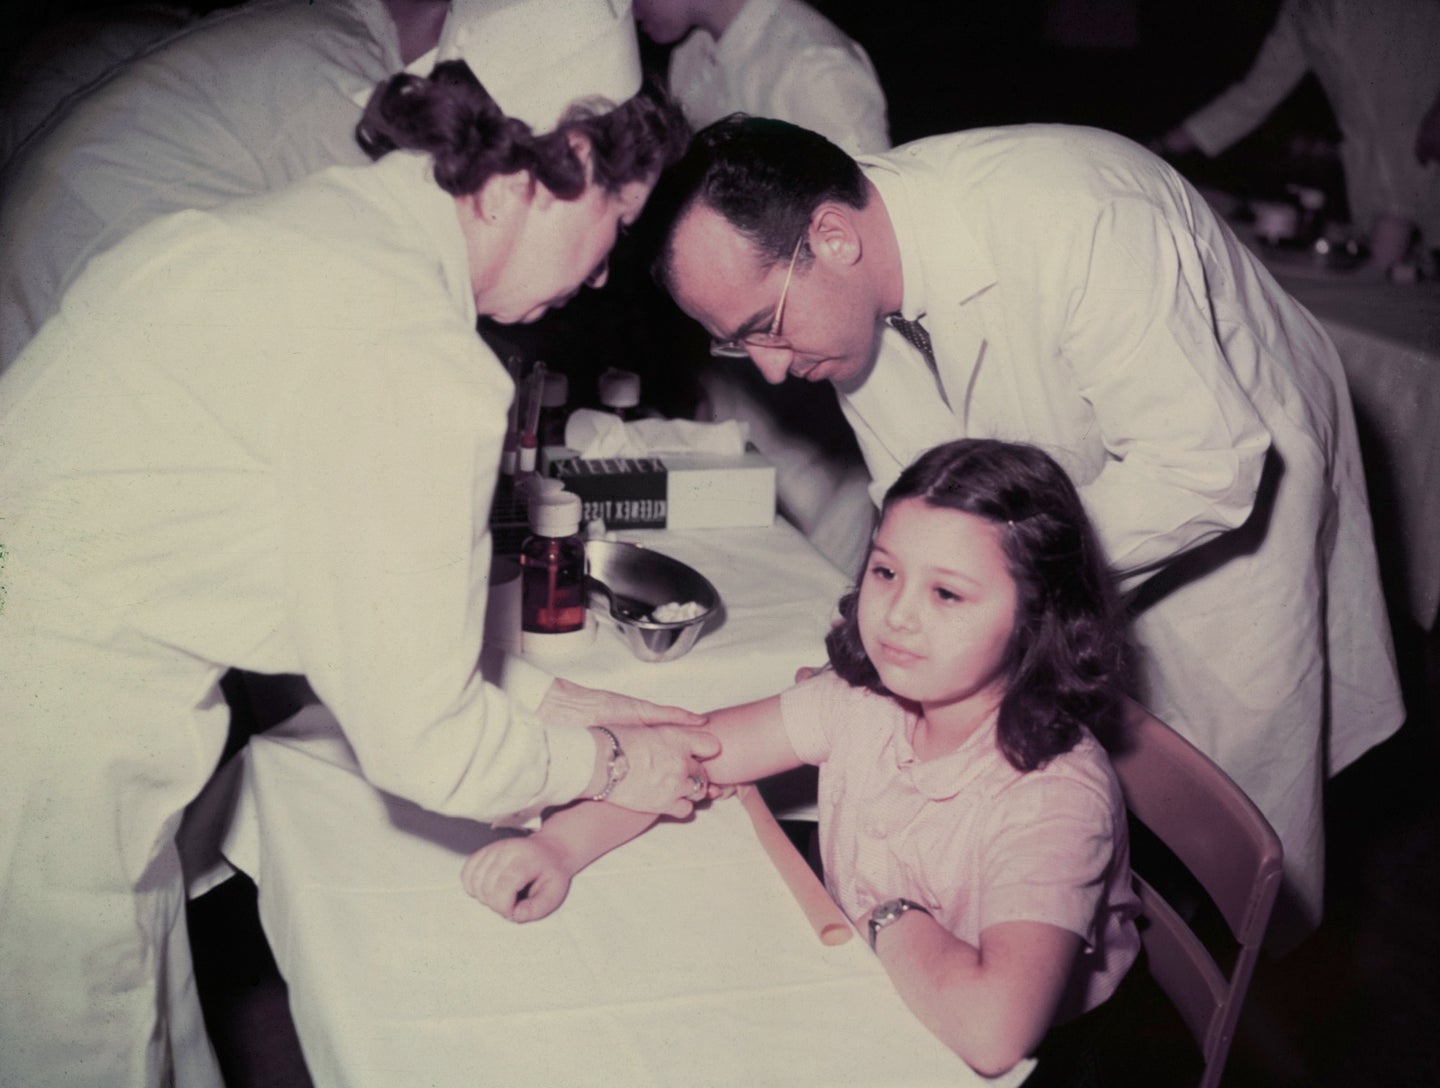 At right, Jonas Salk, the doctor behind the first polio vaccine, administers a shot to a kid in Pennsylvania in 1955.